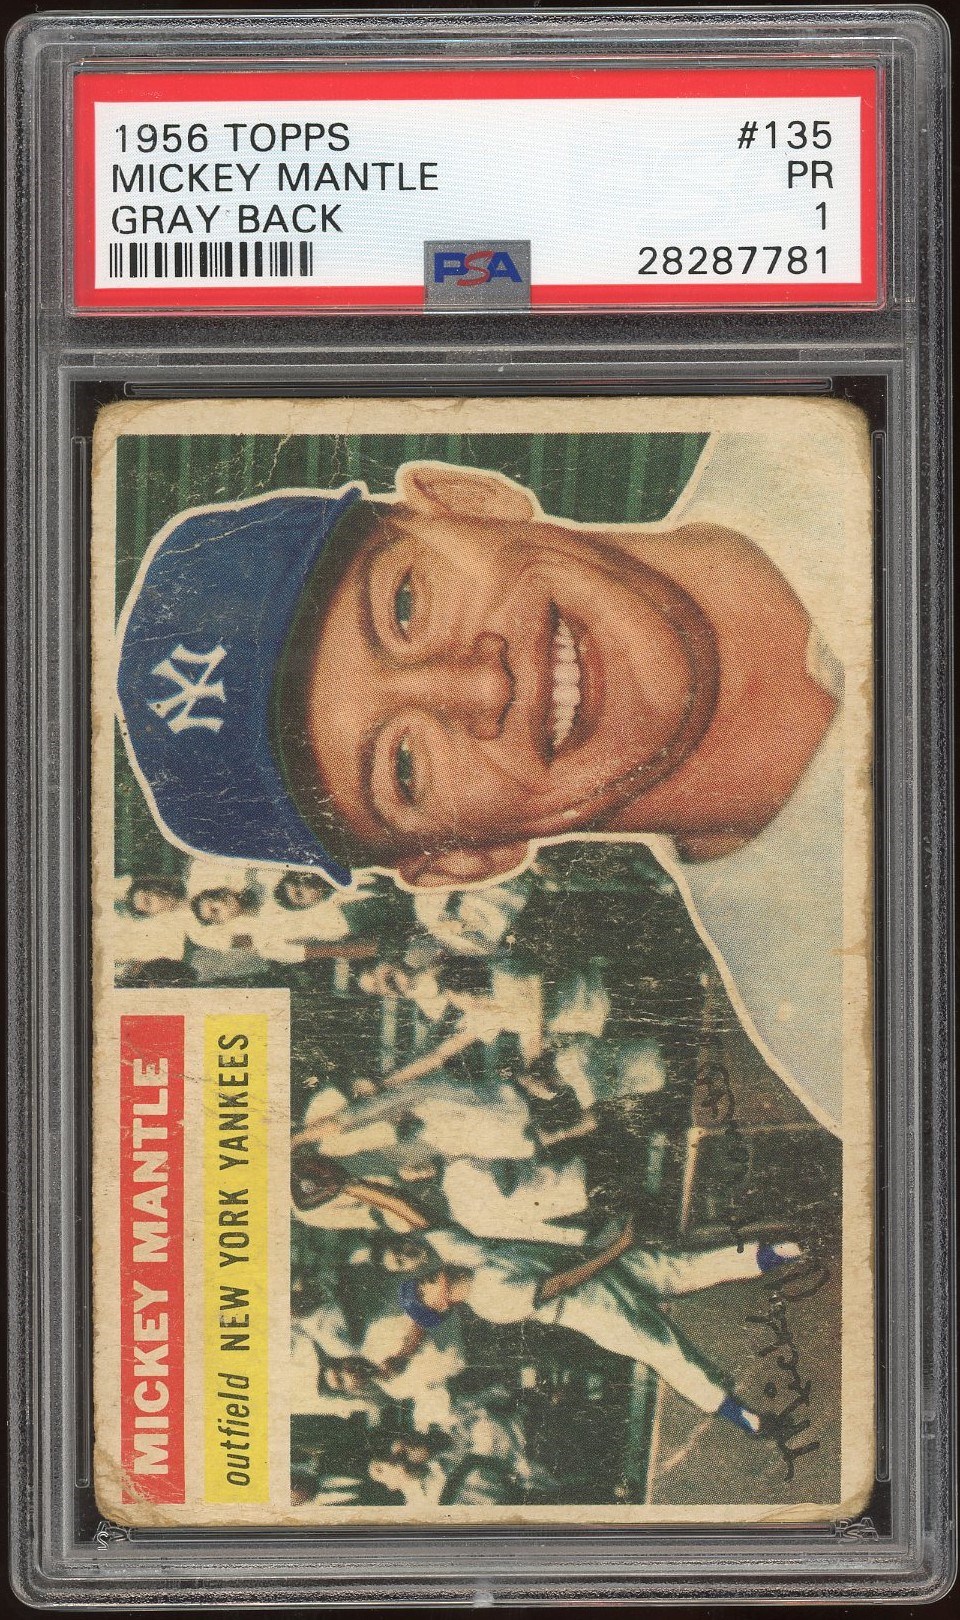 - 1956 Topps Mickey Mantle #135 Gray Back